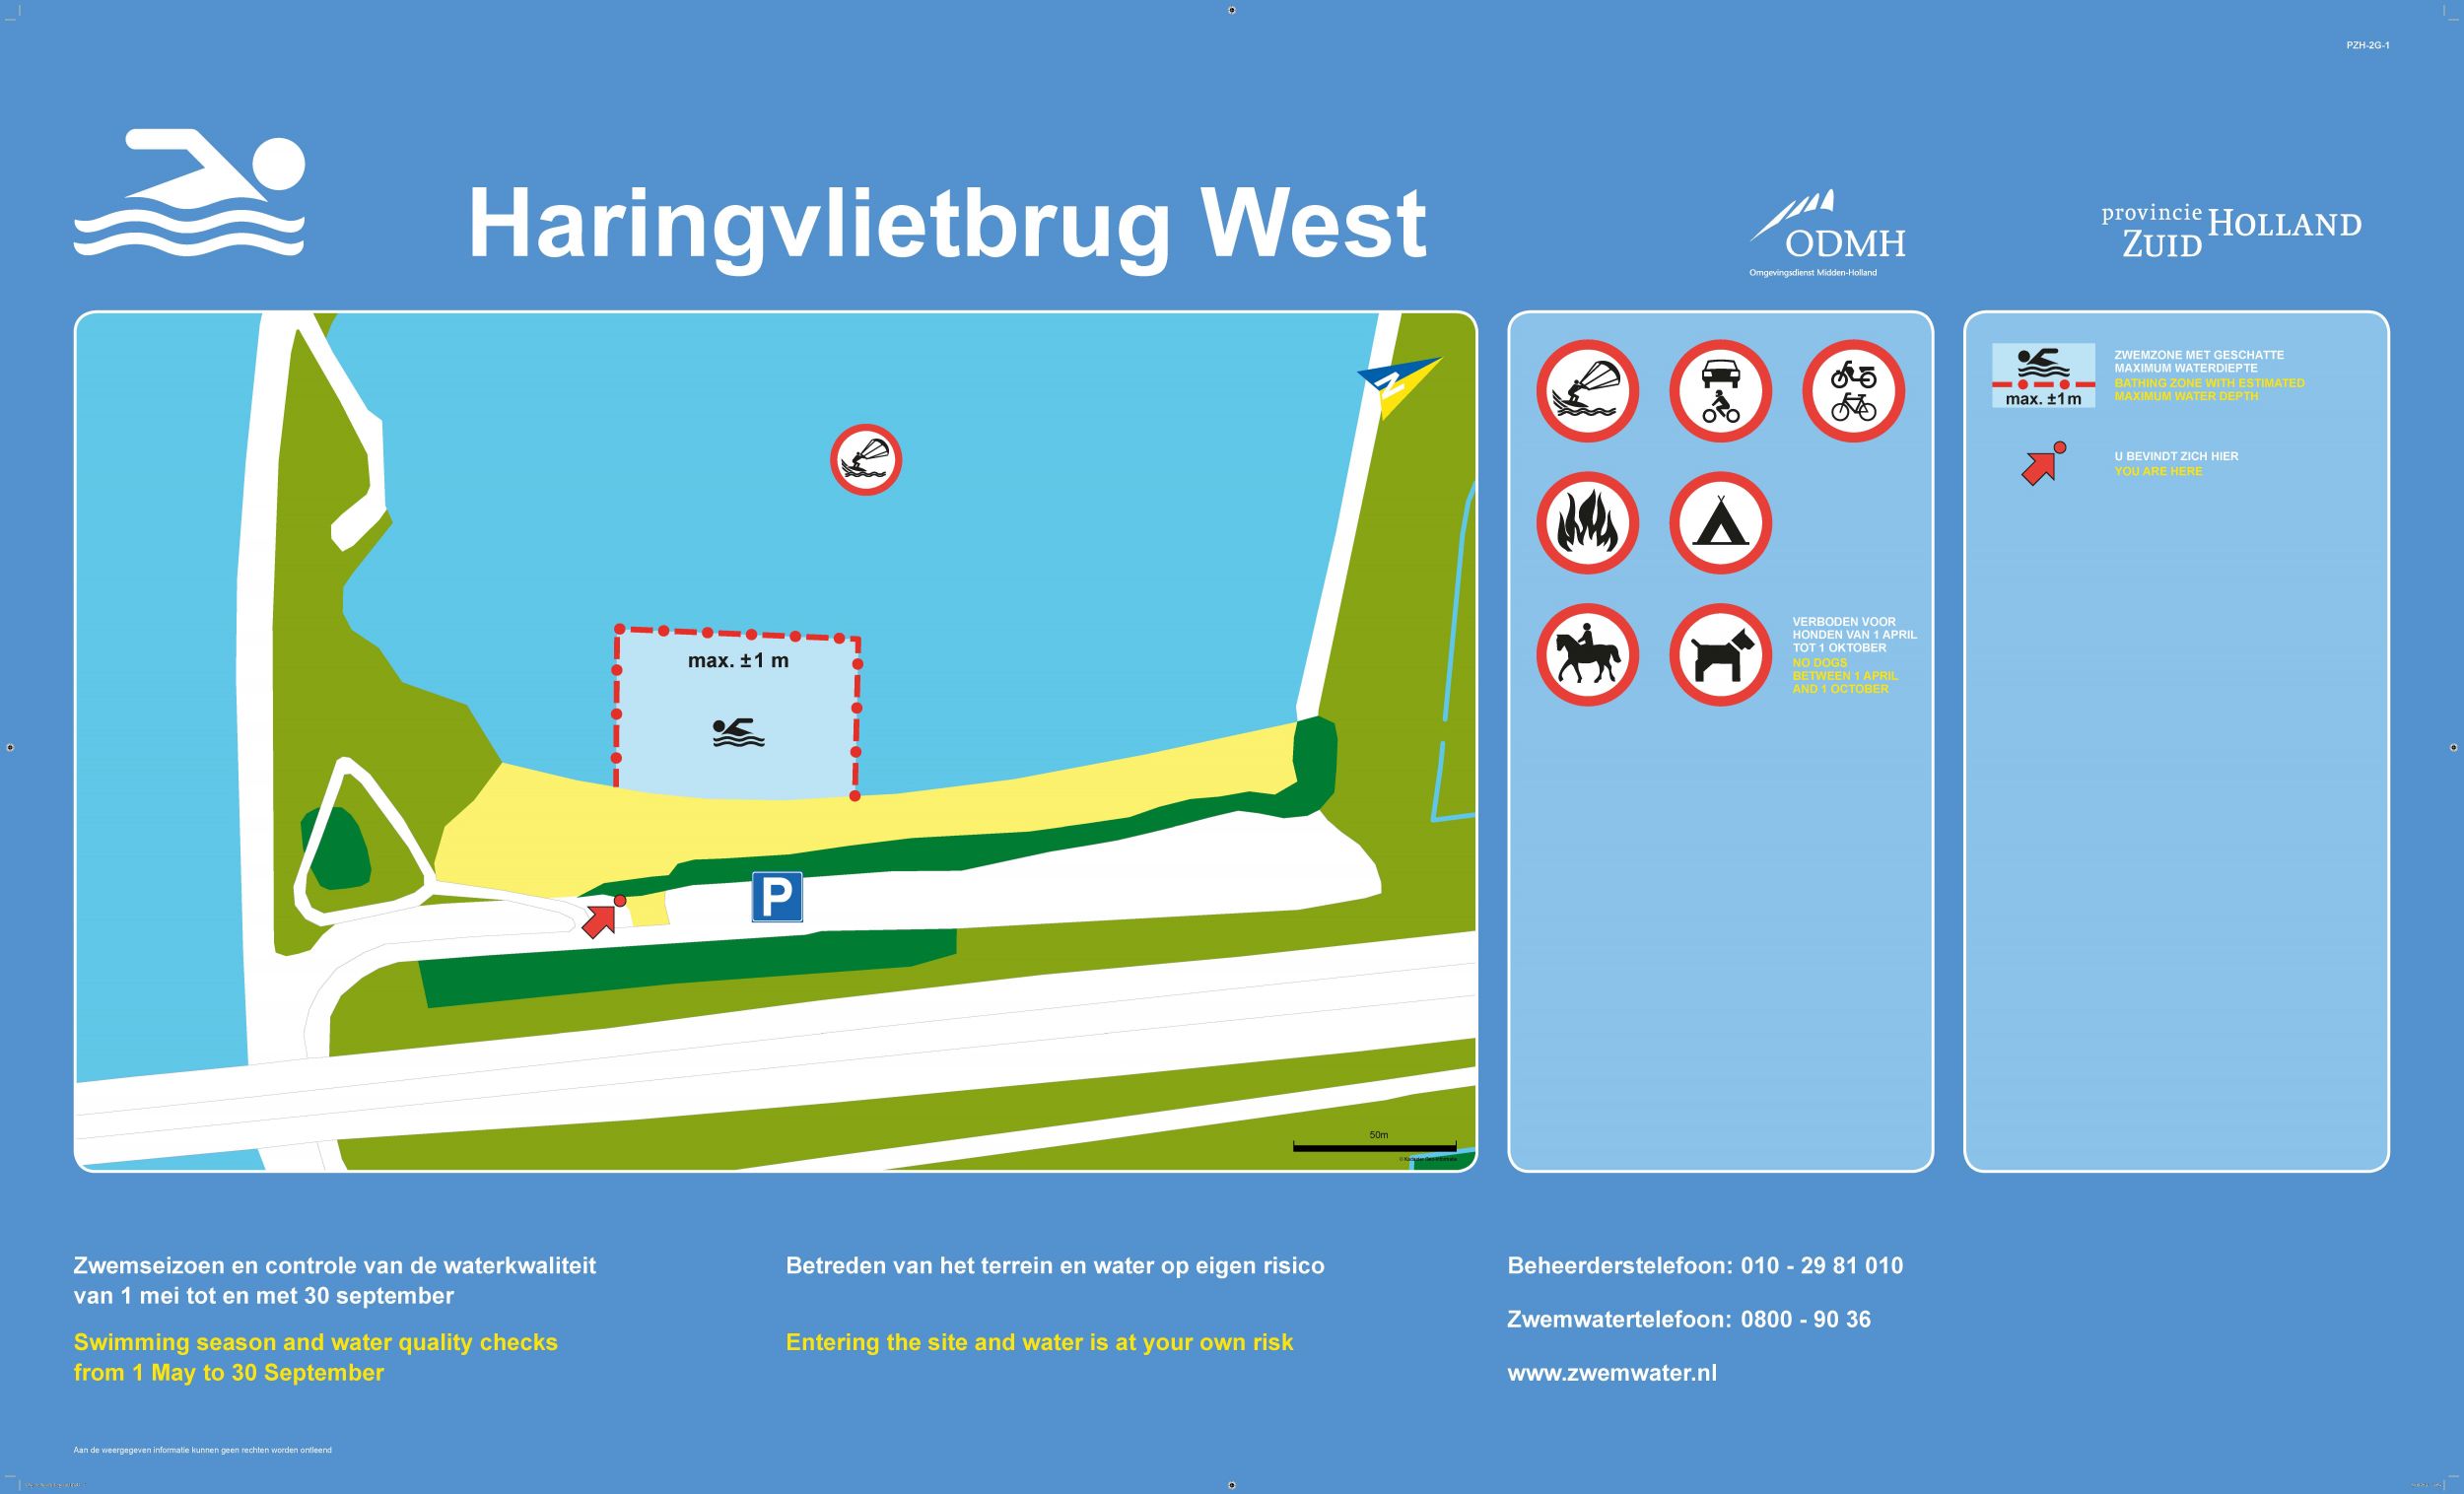 The information board at the swimming location Haringvlietbrug West